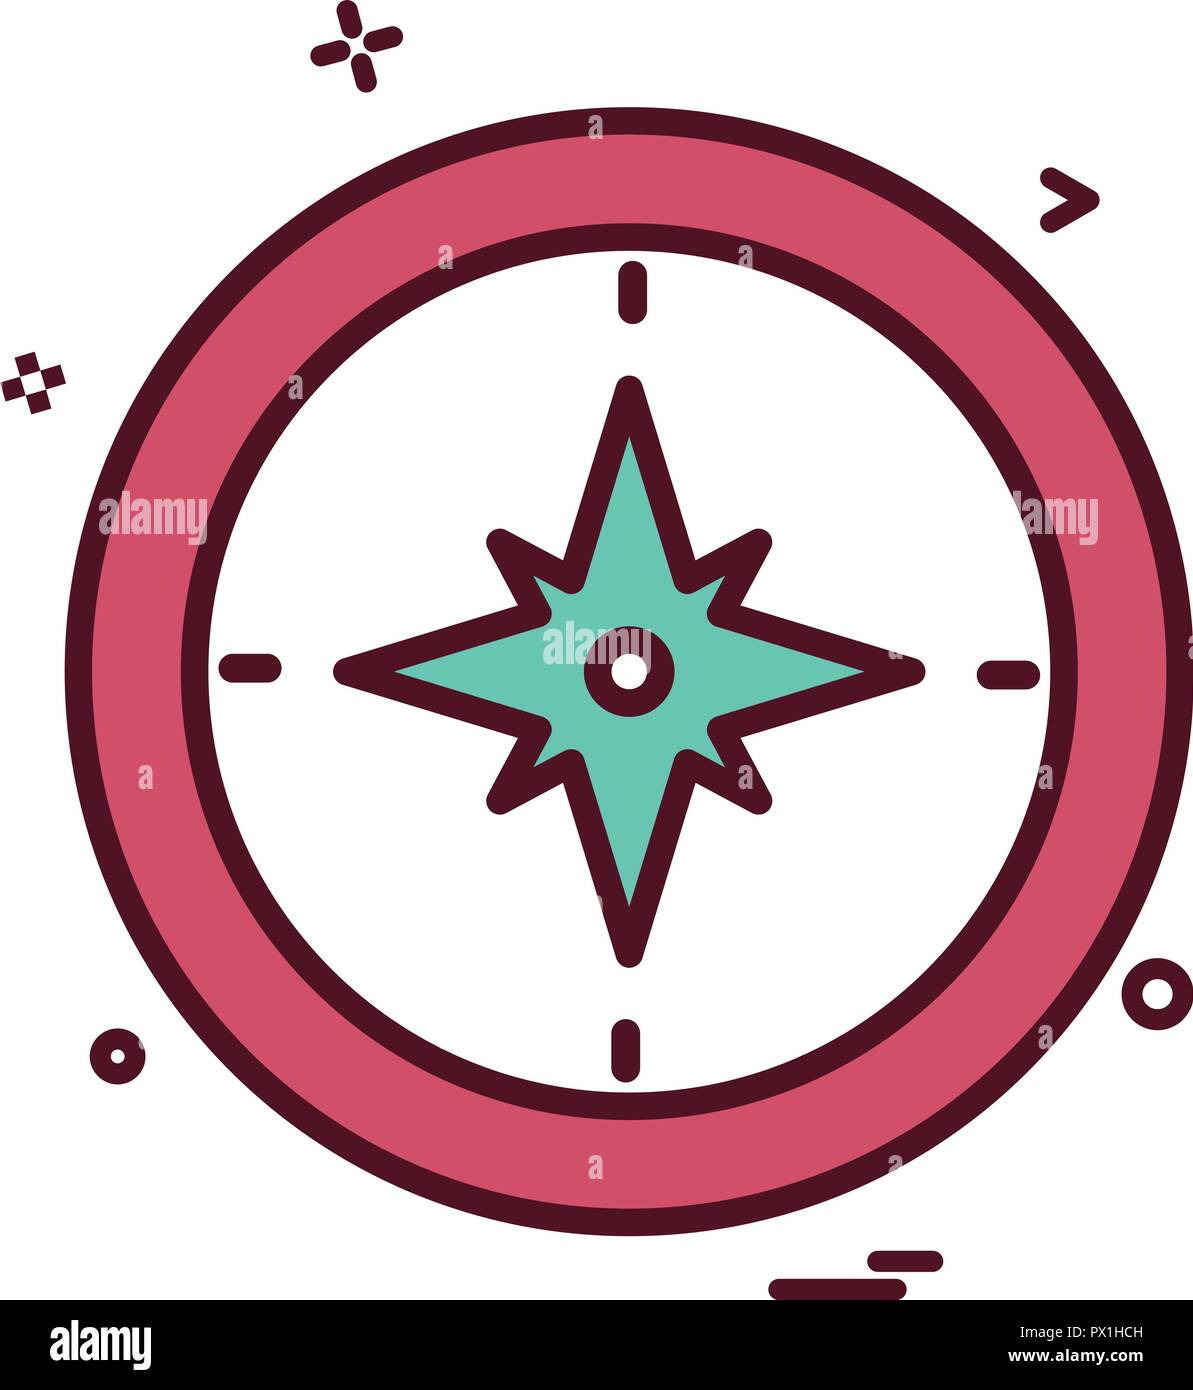 Compass North South East West Icon Vector Design Stock Vector Art